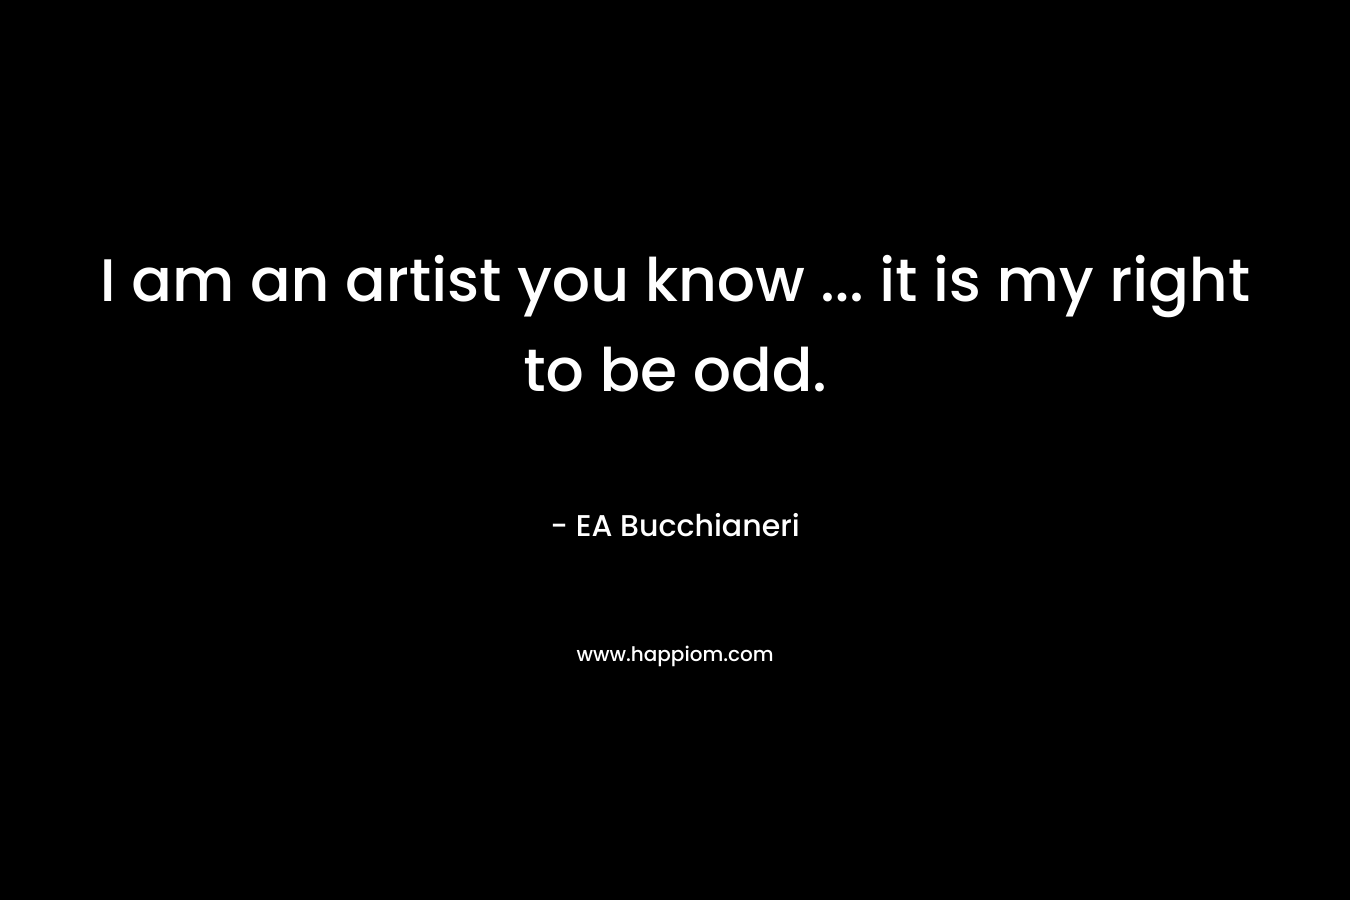 I am an artist you know ... it is my right to be odd.